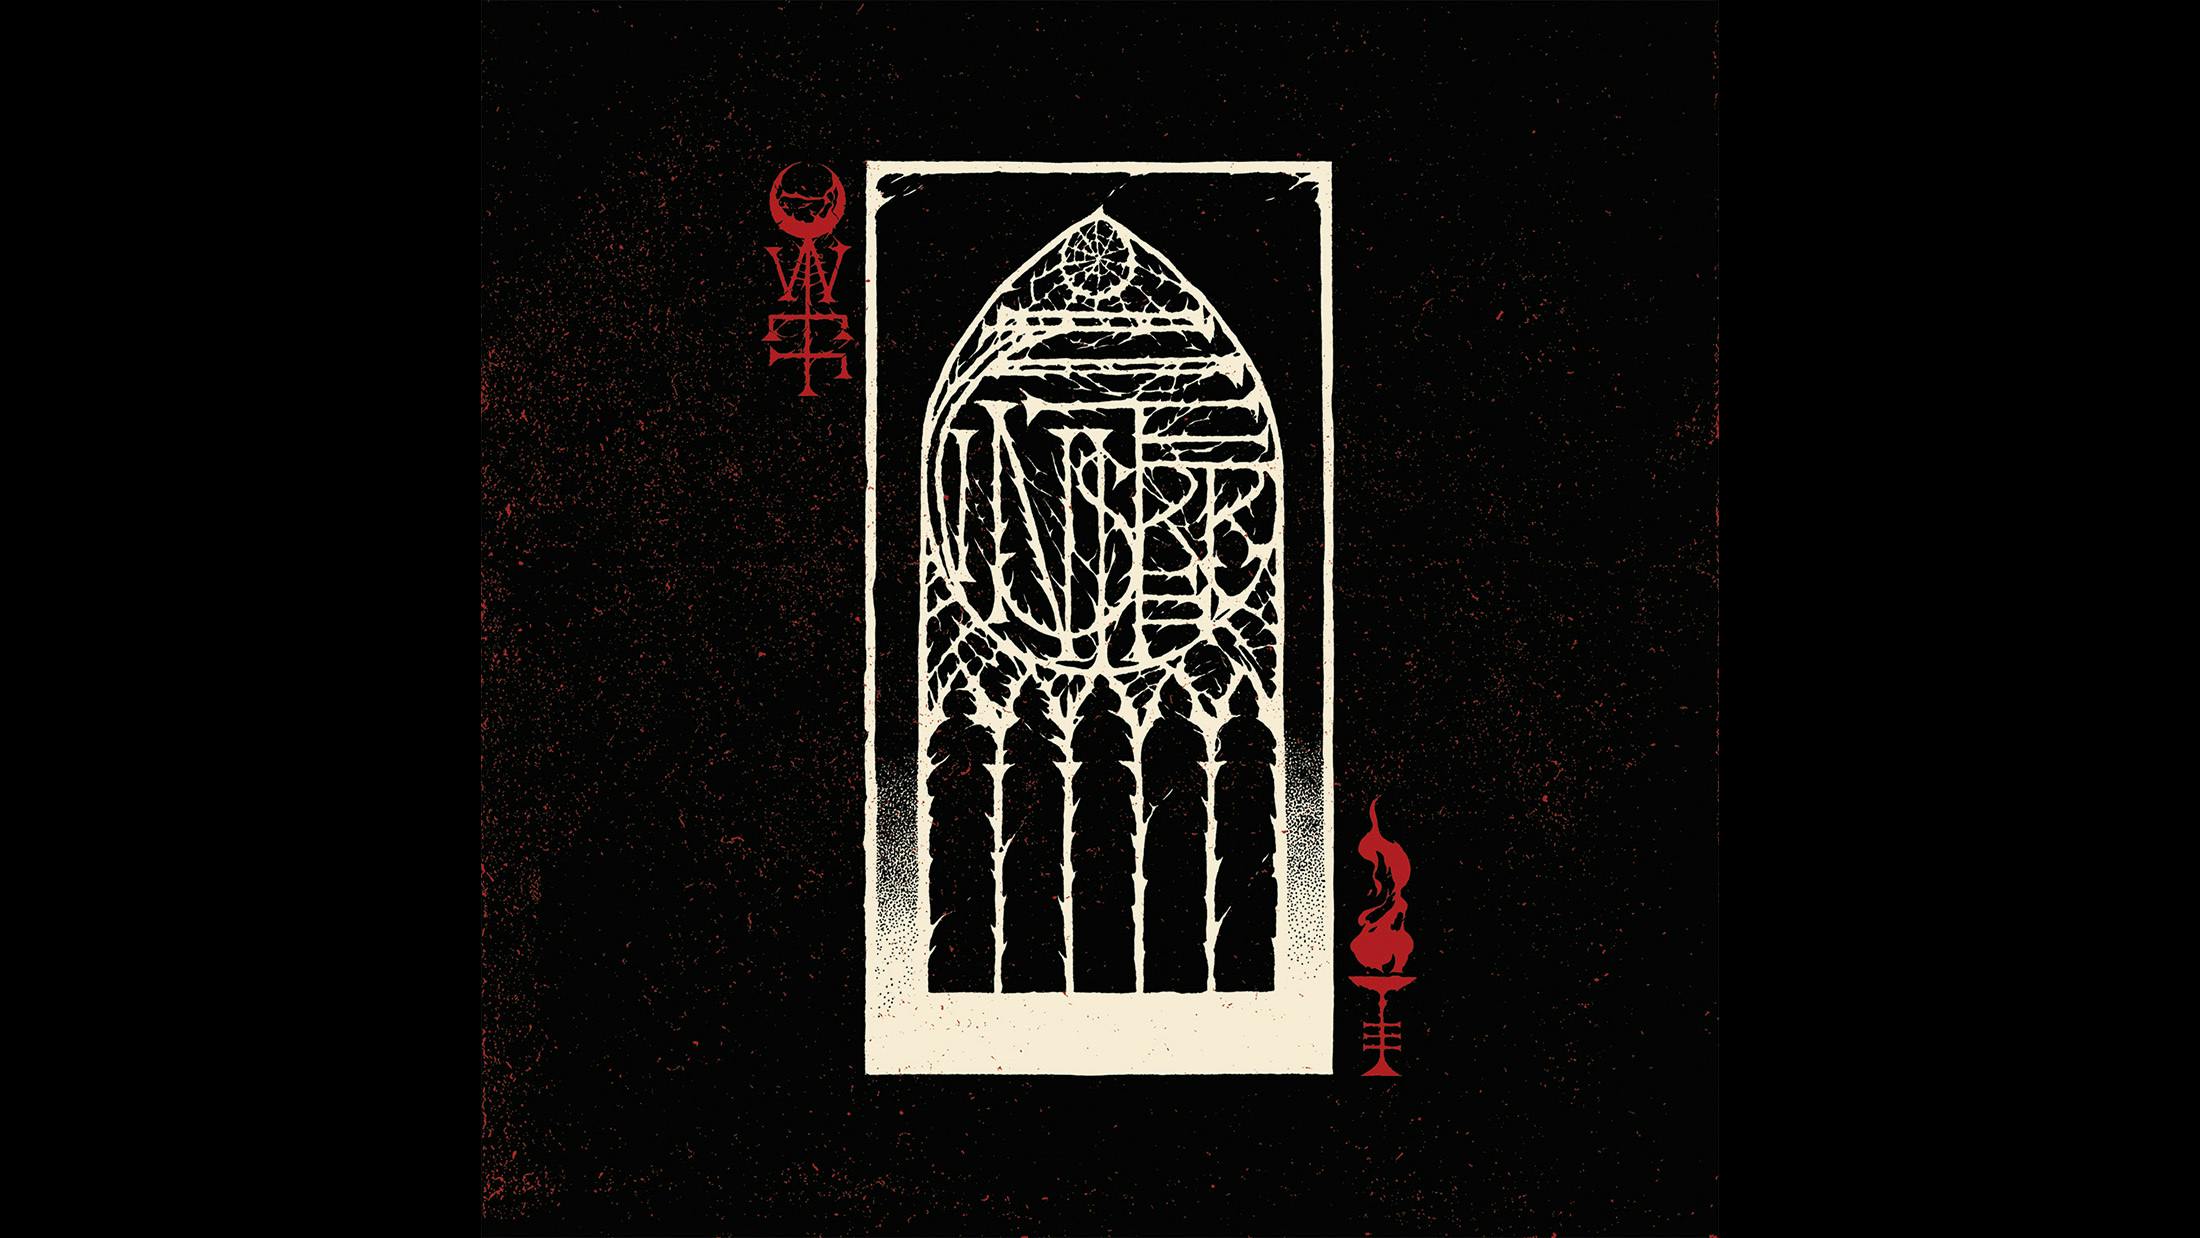 "DWEF’s latest effort feels as much like a classical musical opus as it does a revolutionary black metal record. While black metal is many things, it can sometimes be hard for the genre to convey emotion straight away; with ‘Finisterre’ however, you can feel the raw emotion behind music and voice. This album feels new like Deathspell Omega, while feeling classic like Emperor. Best black metal album of the year."